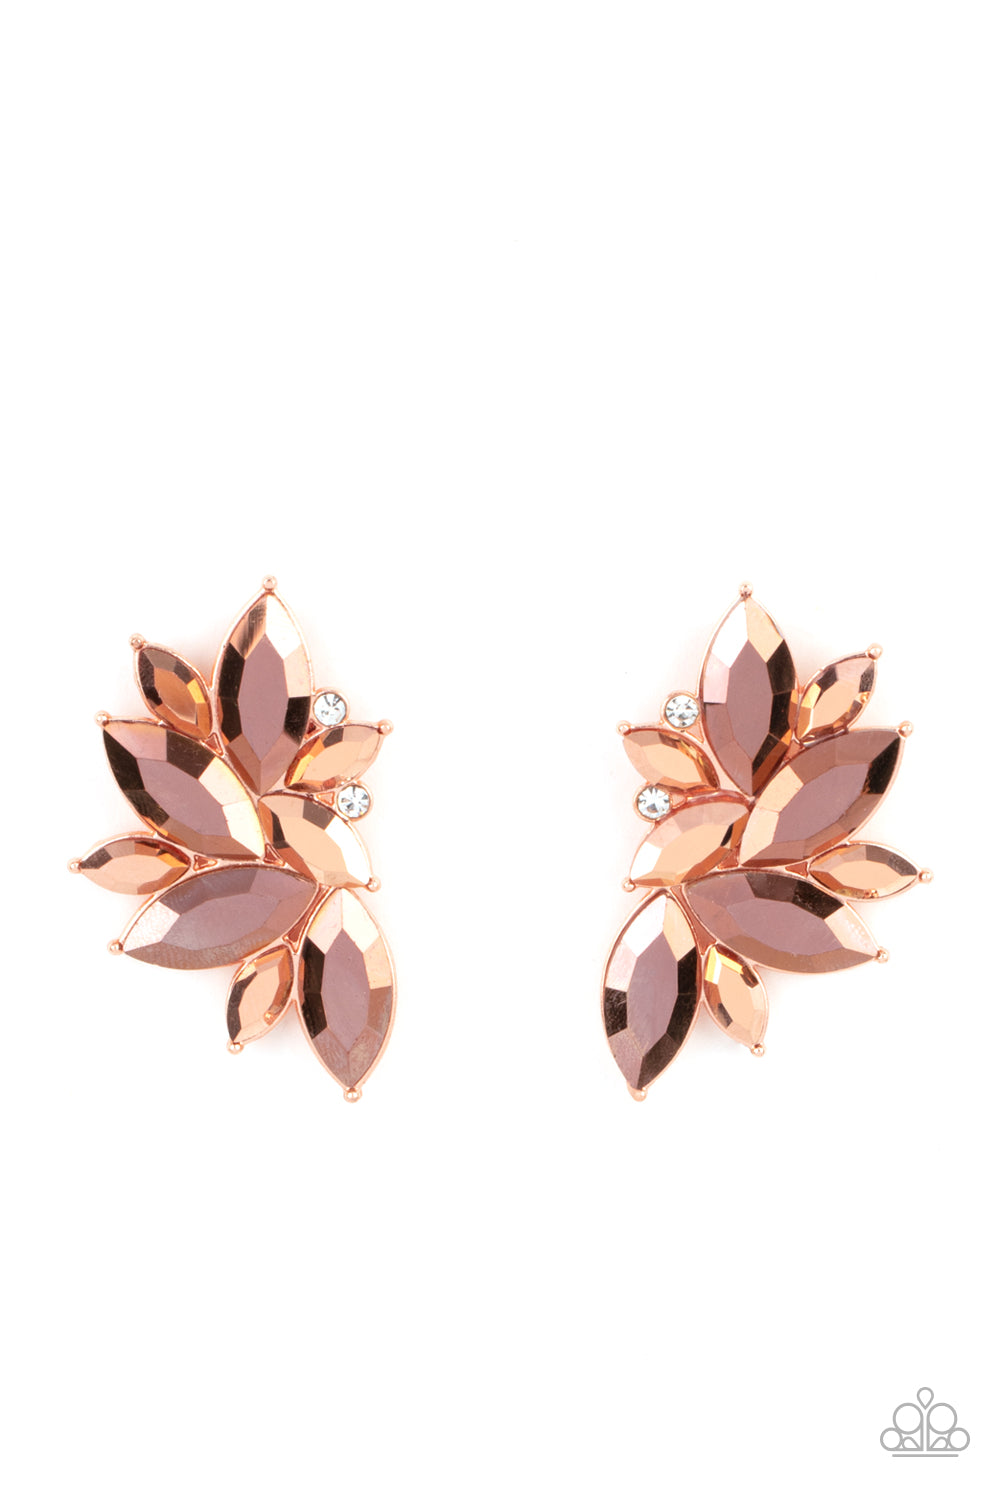 Paparazzi Instant Iridescence - Copper Earrings - A Finishing Touch Jewelry